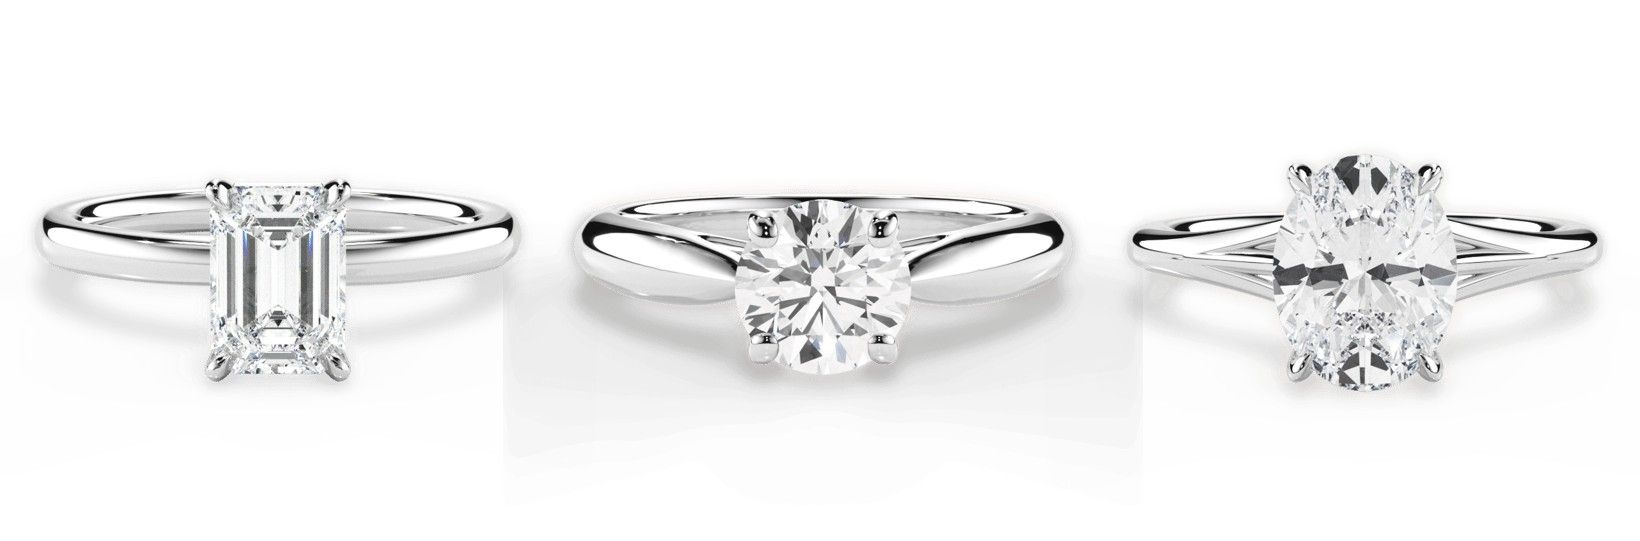 Discover Your Ideal Diamond Engagement Ring: Selections for Every Style  image1